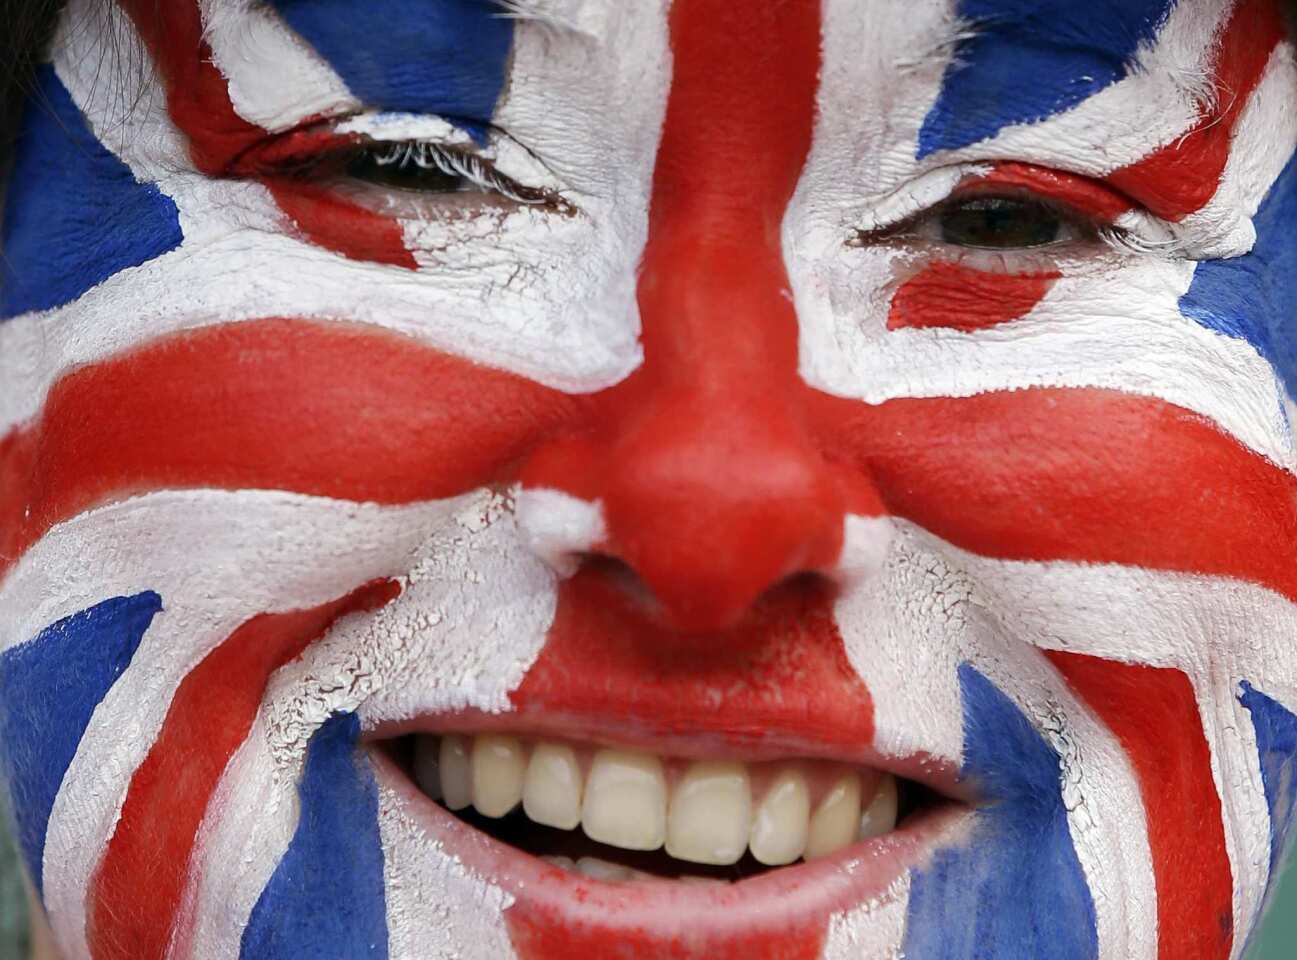 Tennis fan Kate Martin bears a version of the Union Flag painted on her face as she watches the men's singles bronze medal match during the 2012 London Olympics last Sunday.